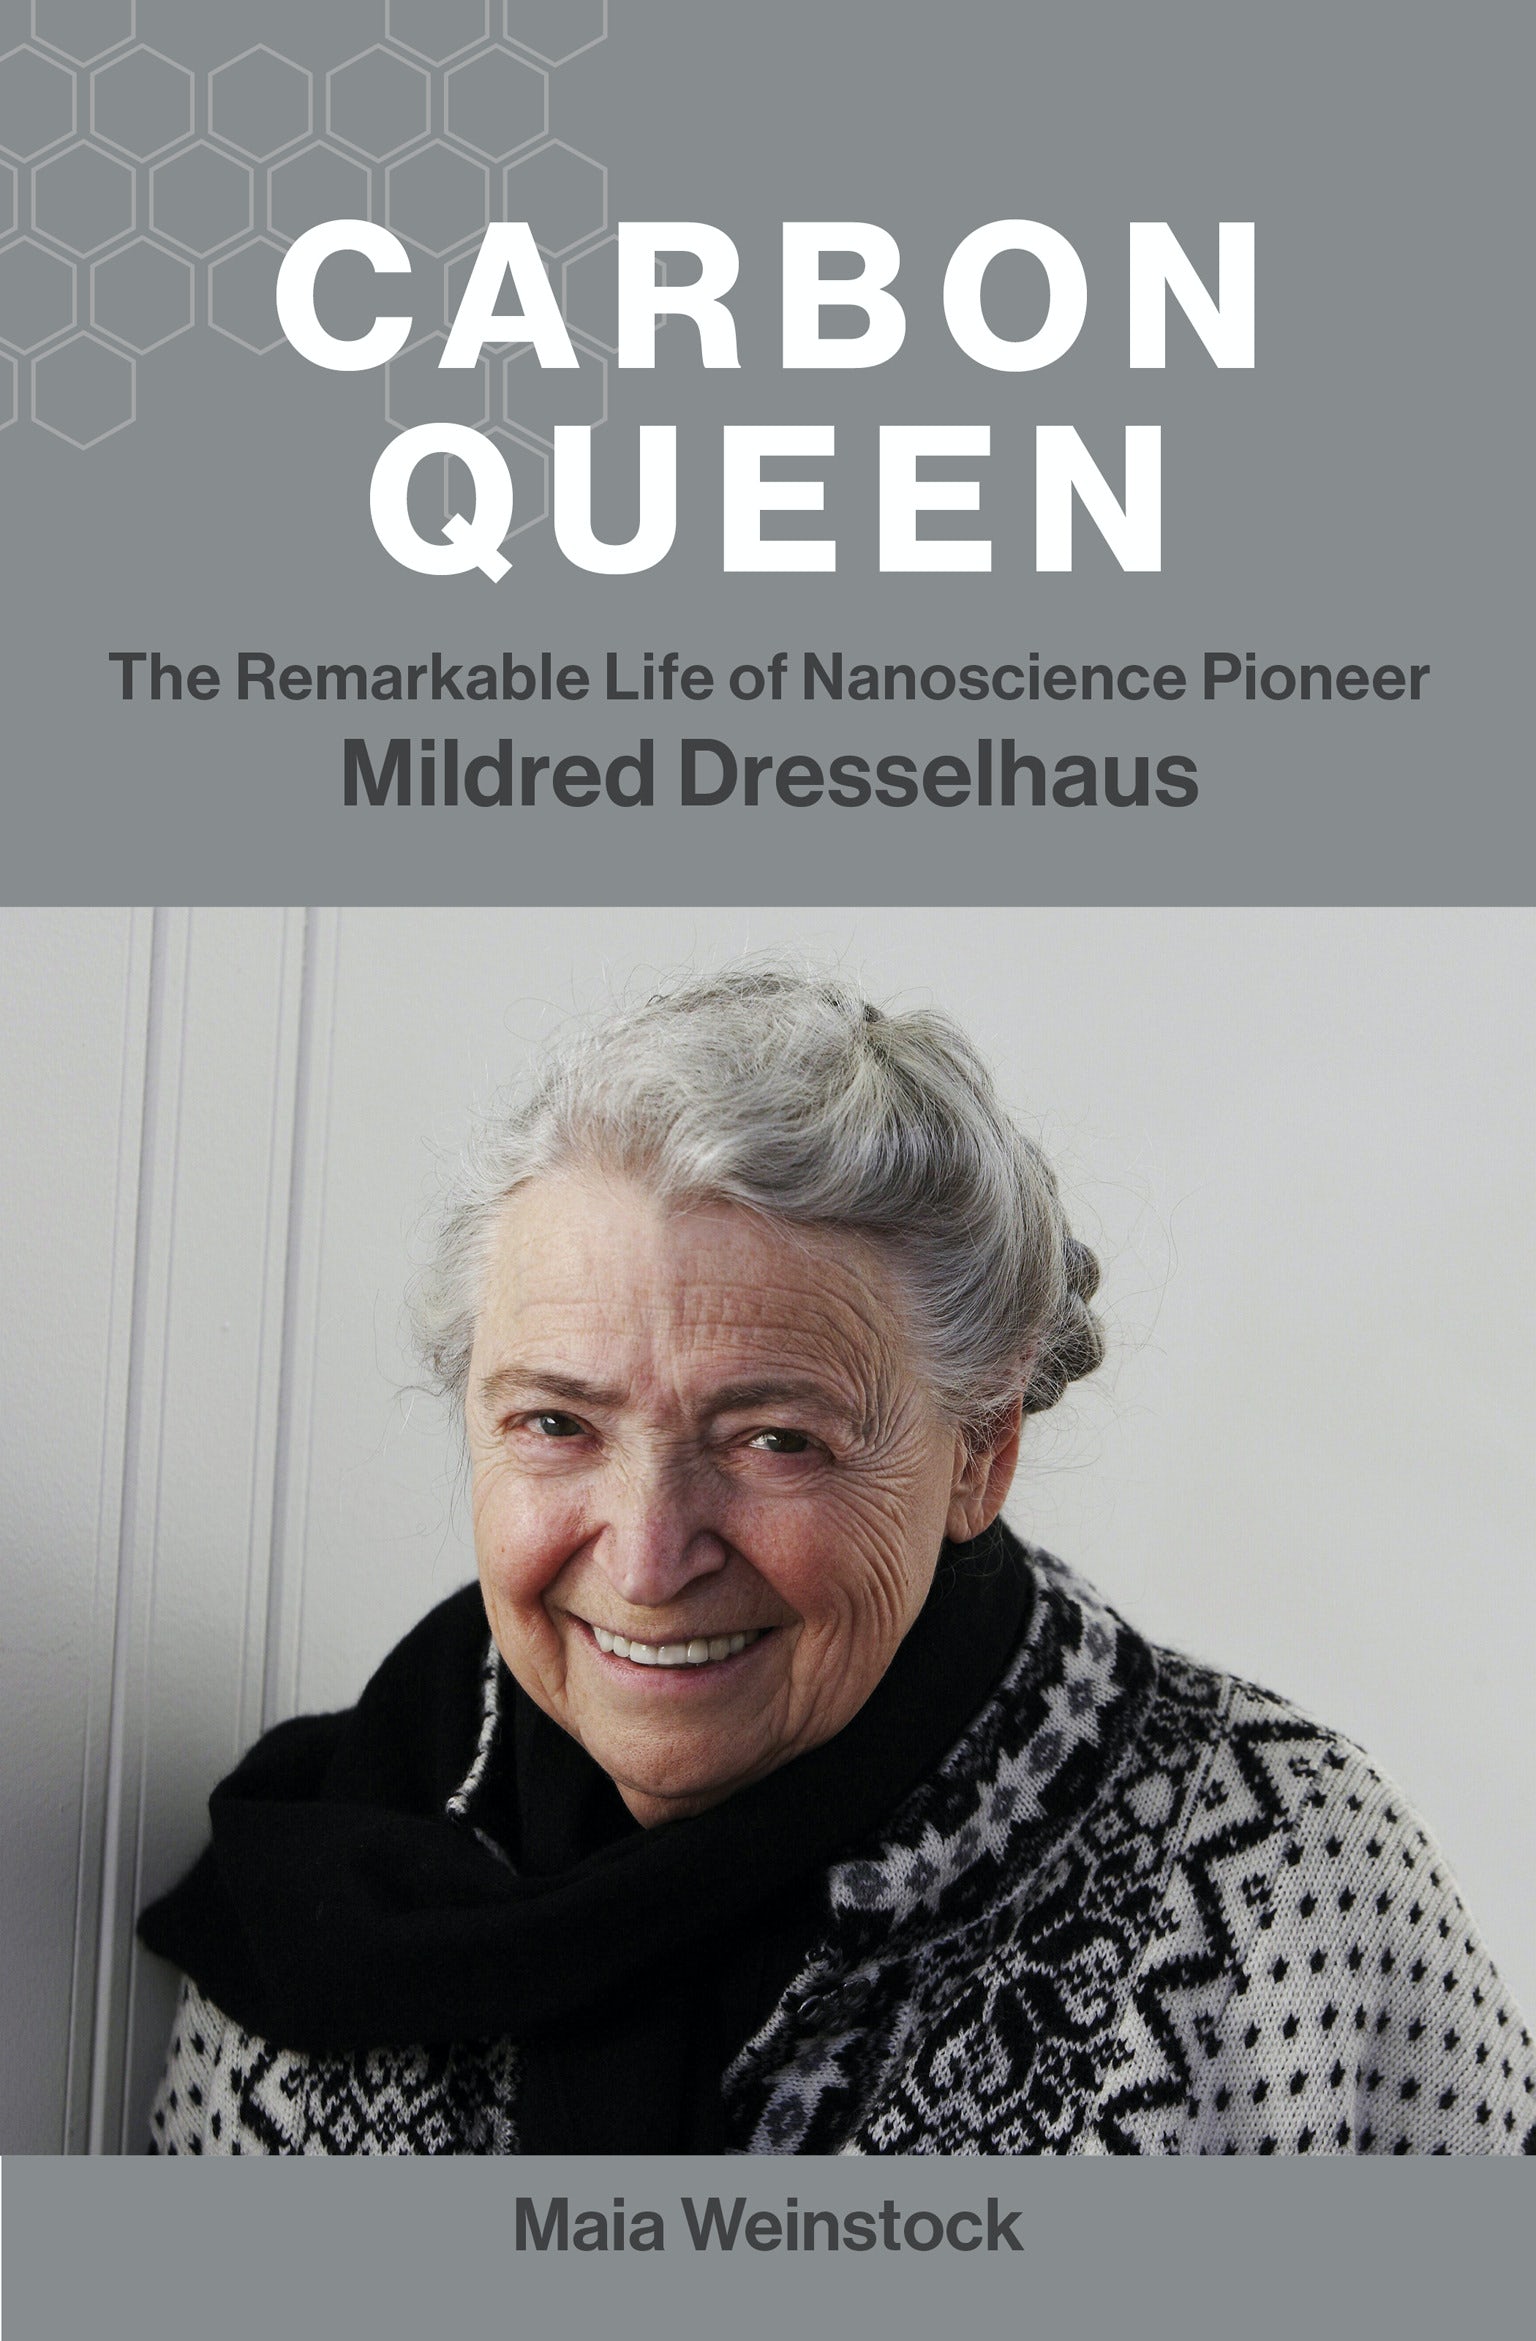 The Carbon Queen jacket is elegant gray, with a carbon molecular structure and a smiling photo of Mildred Dresselhaus, wearing her trademark black and white shawl.